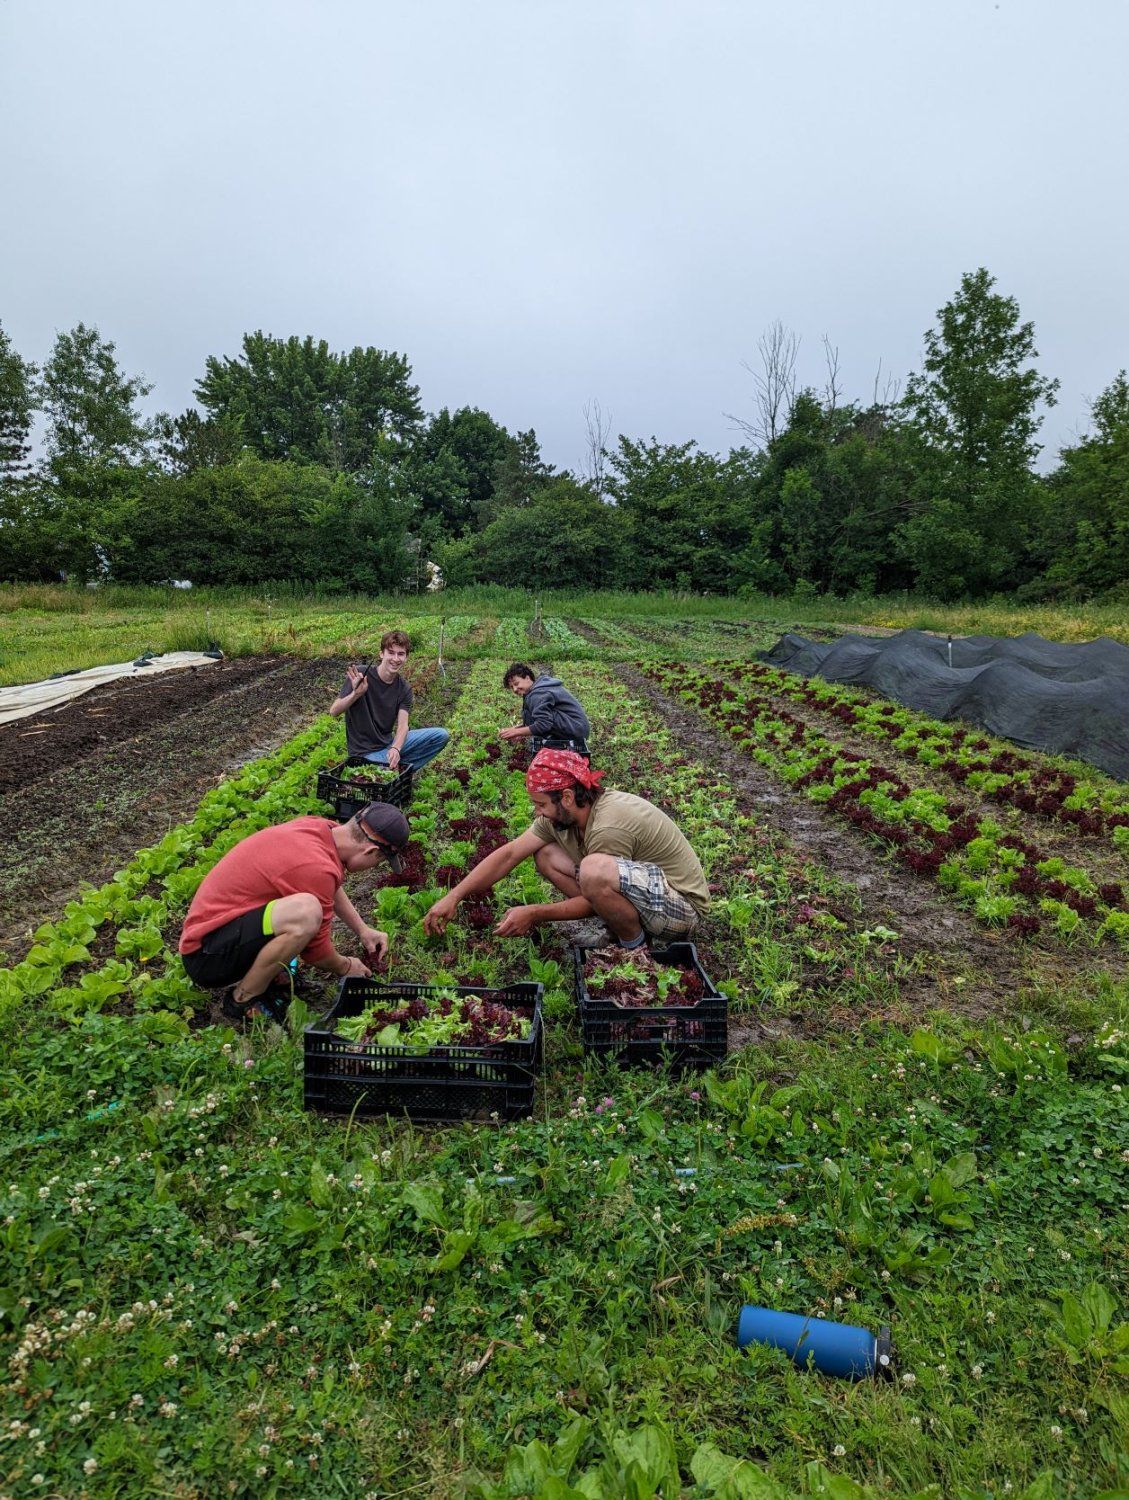 Next Happening: 2022 Farm Share Week 6 - The Crew Expands